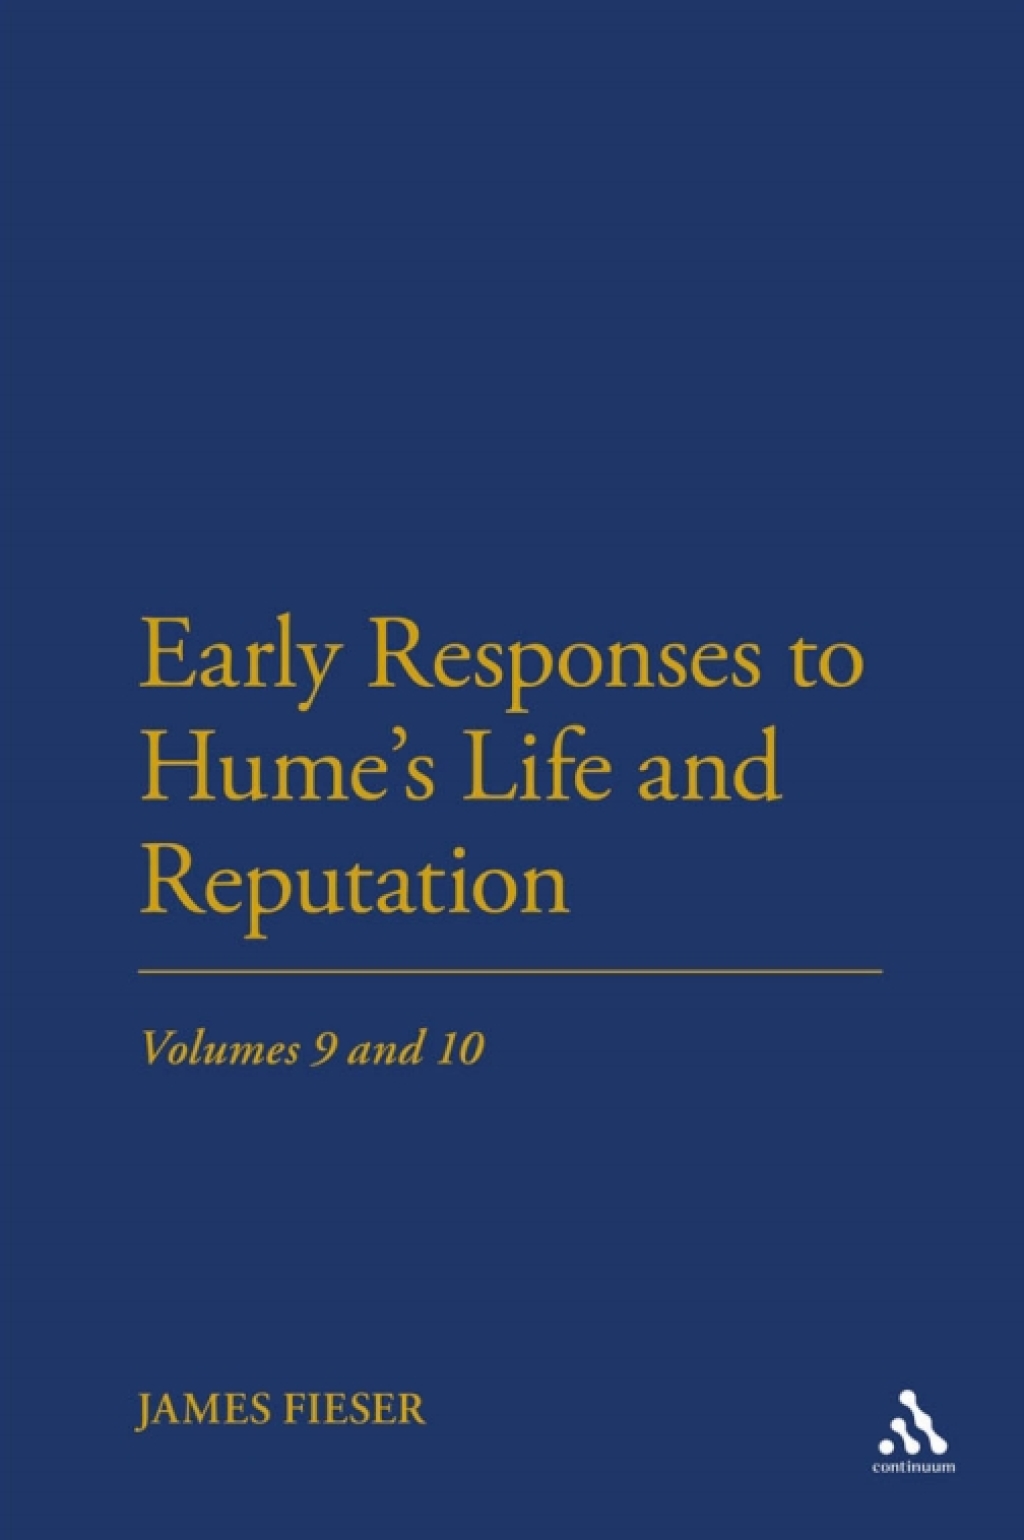 Early Responses to Hume's Life and Reputation (eBook)